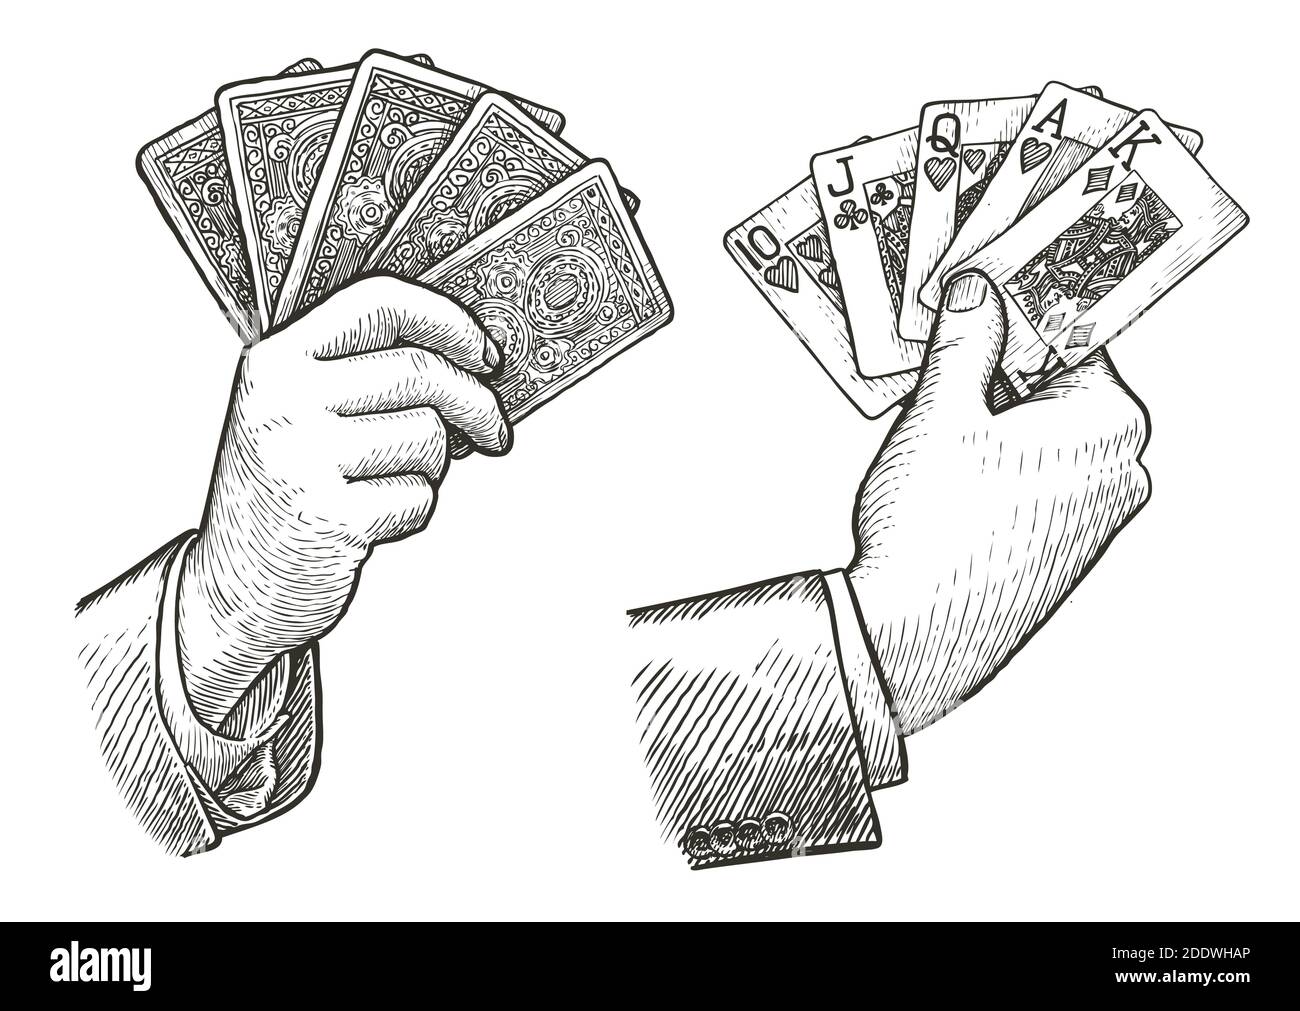 Poker cards Straight Flush in hand. Playing cards sketch vintage vector illustration Stock Vector